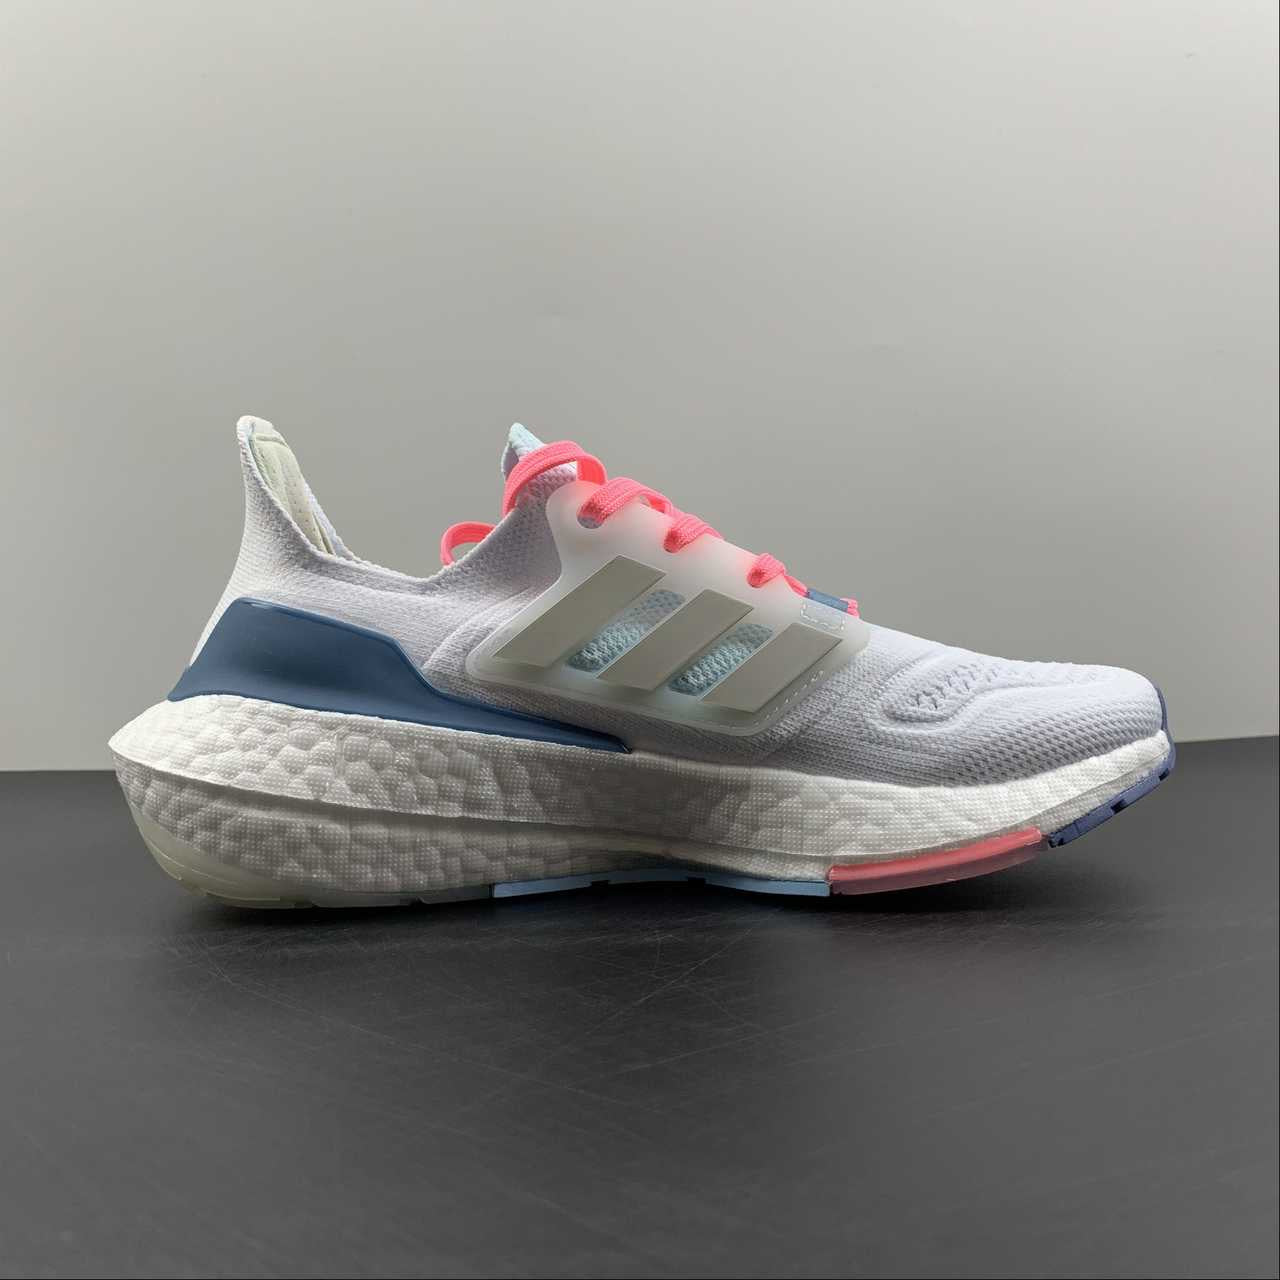 Chaussures Adidas Ultraboost rose clair